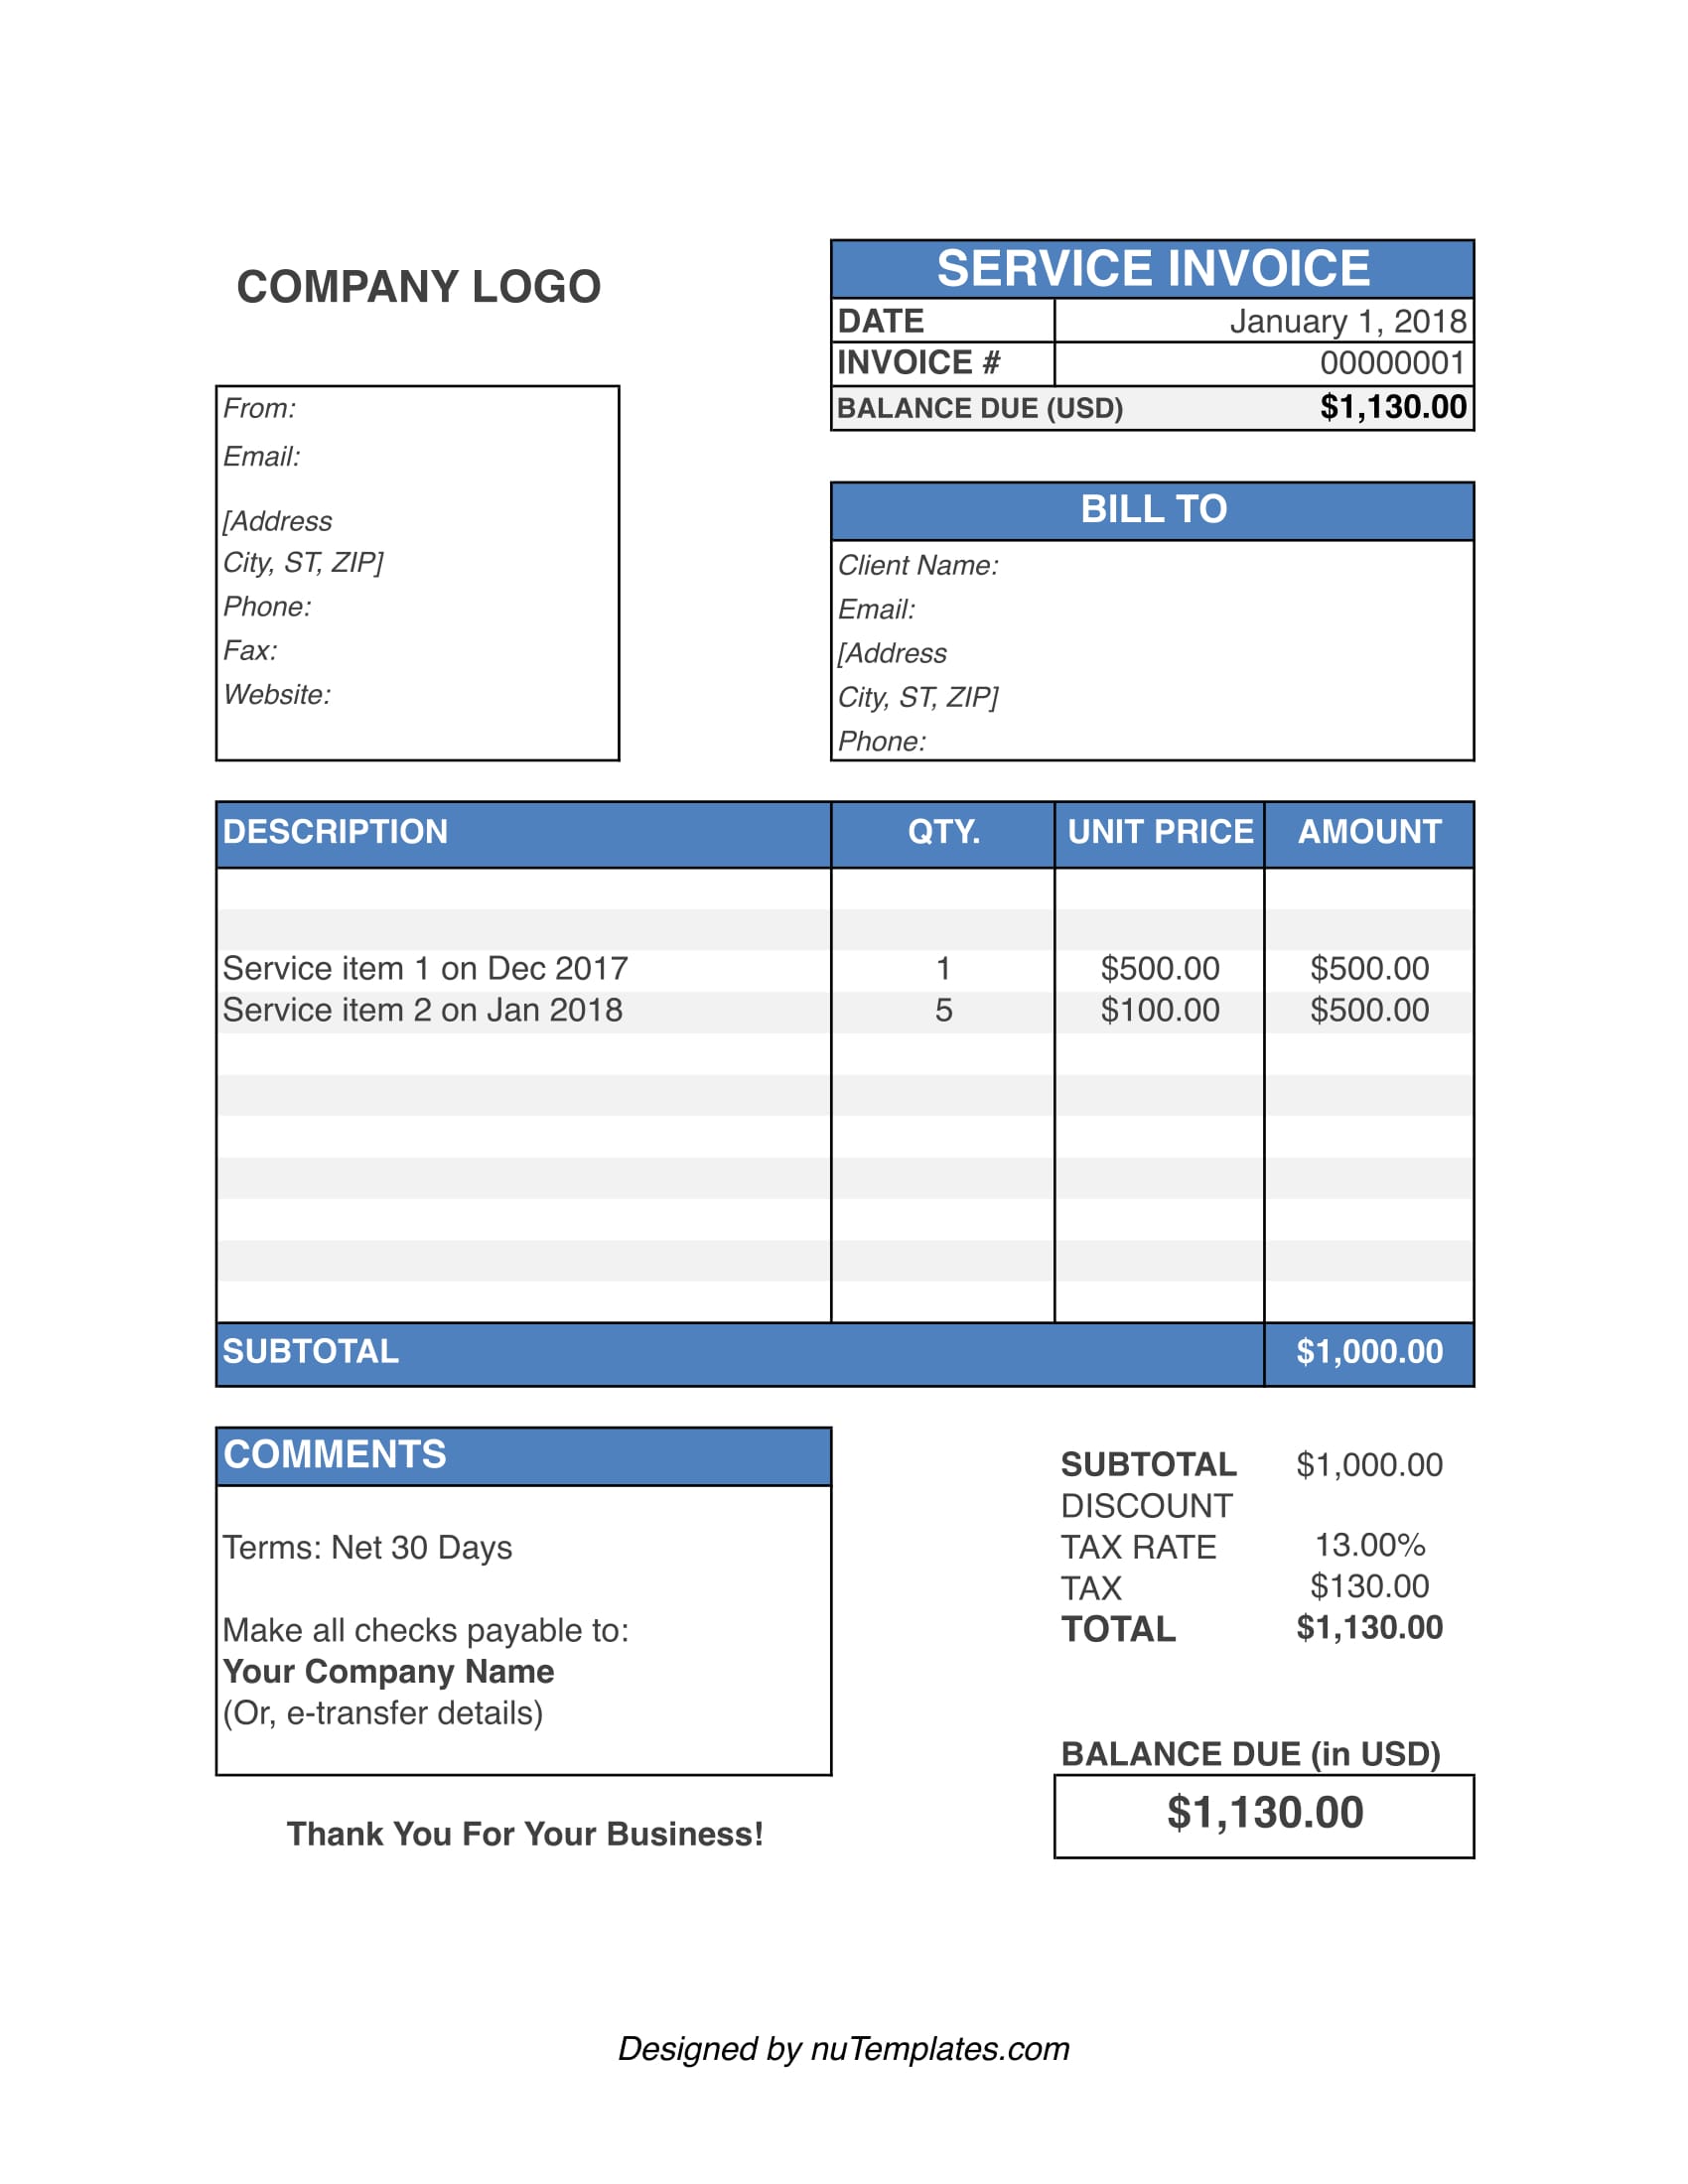 invoice templates free invoice template nutemplates